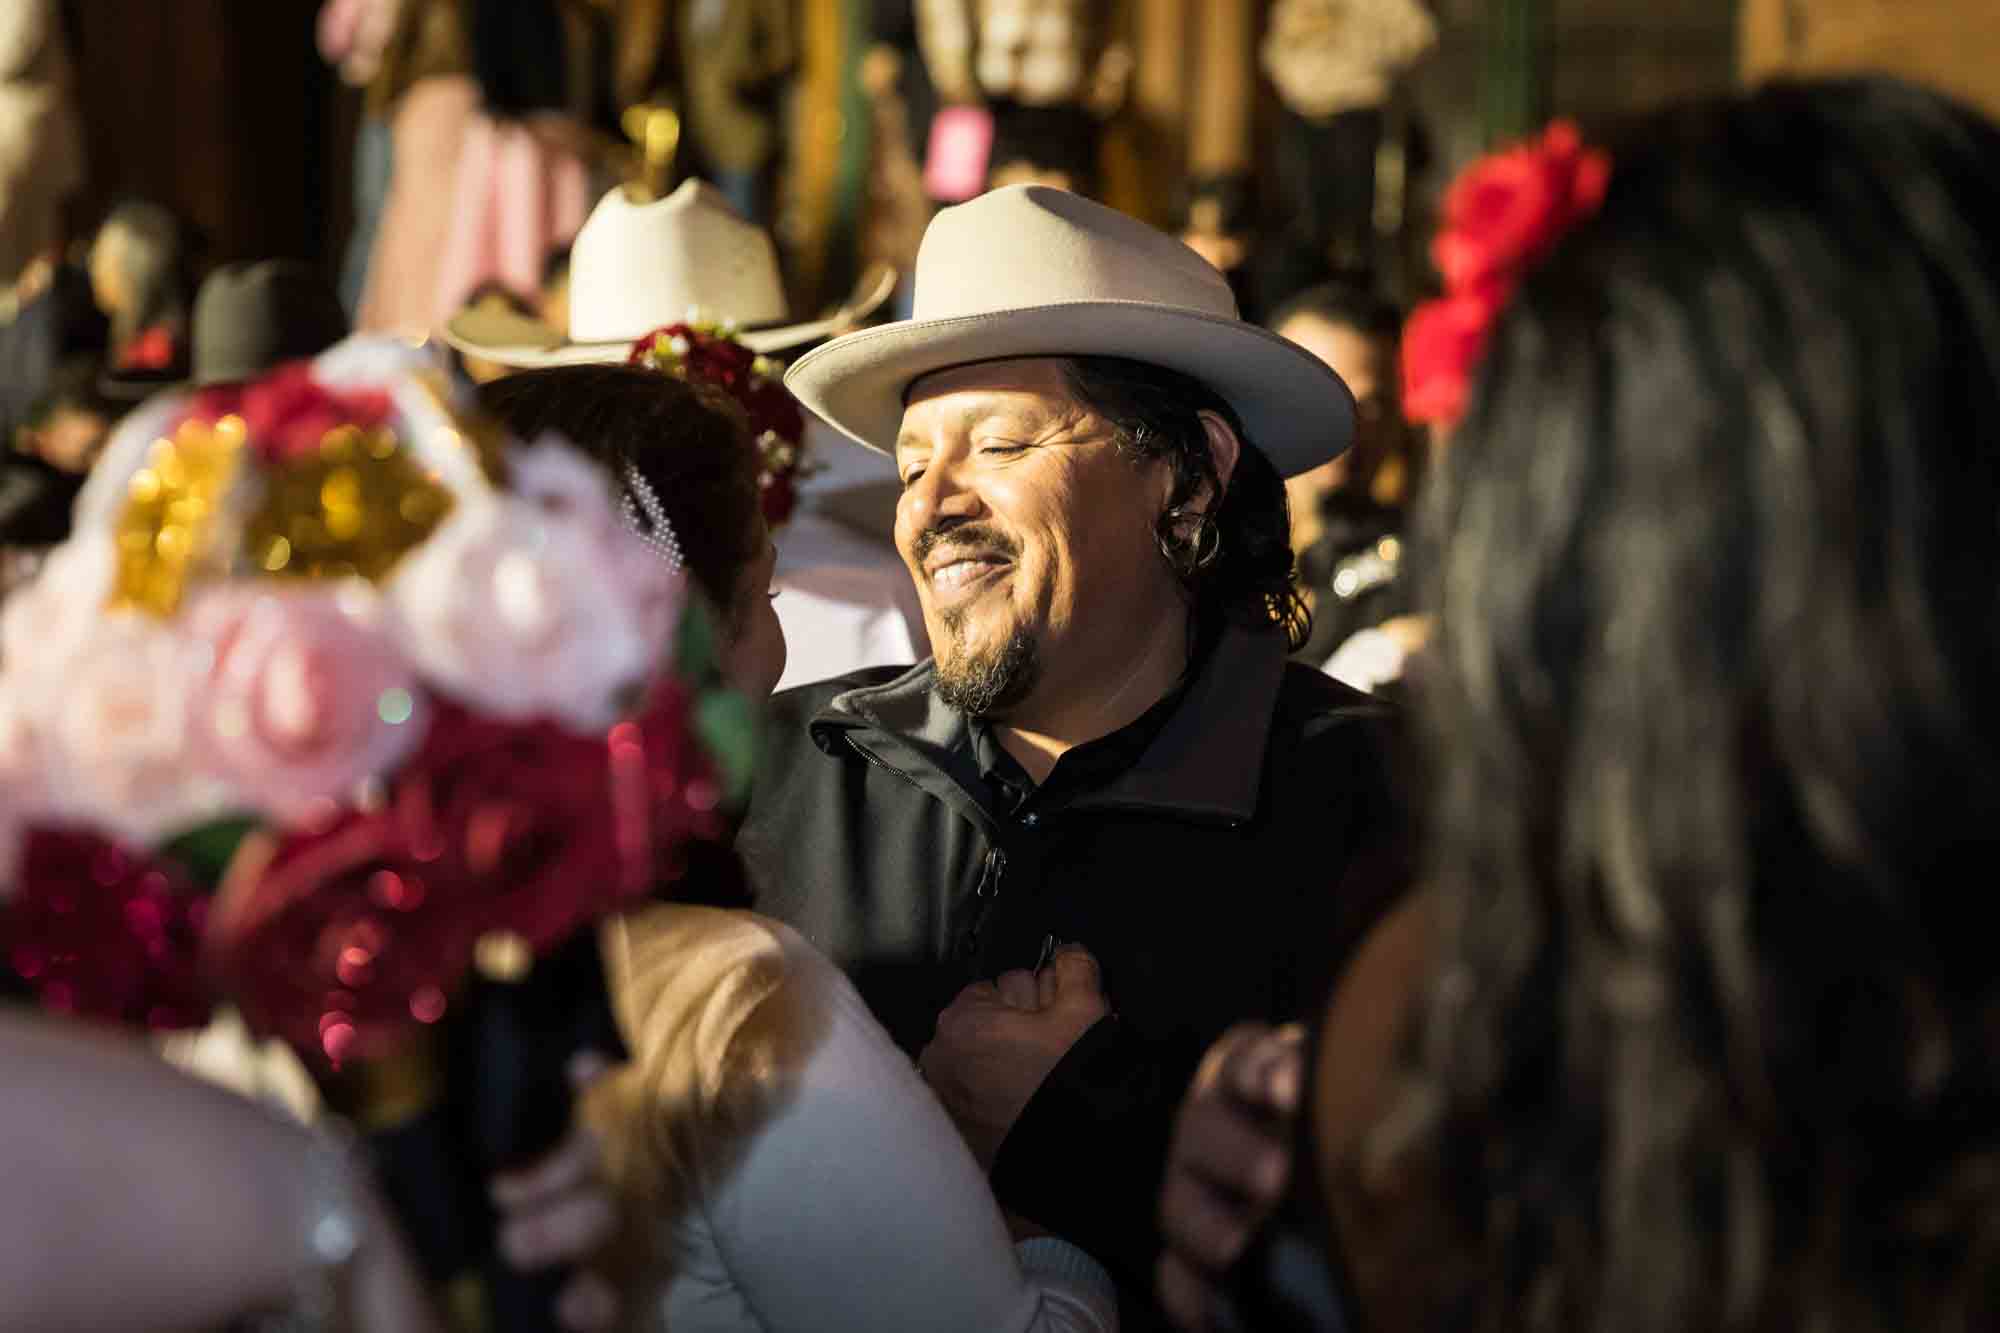 Man wearing white cowboy hat looking at bride for an article on the Bexar county mass wedding event